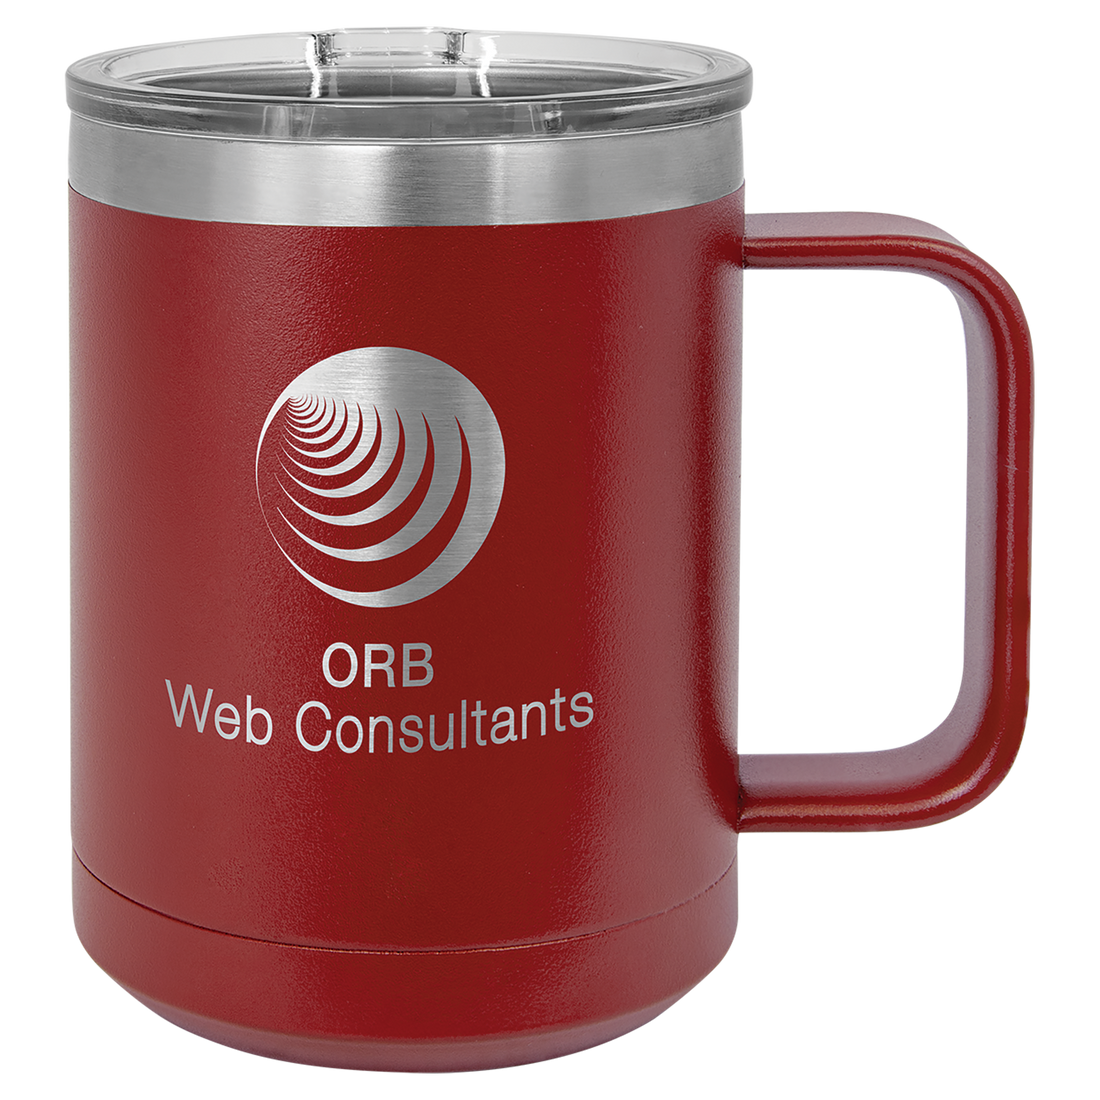 Red insulated travel mug with logo engraving.